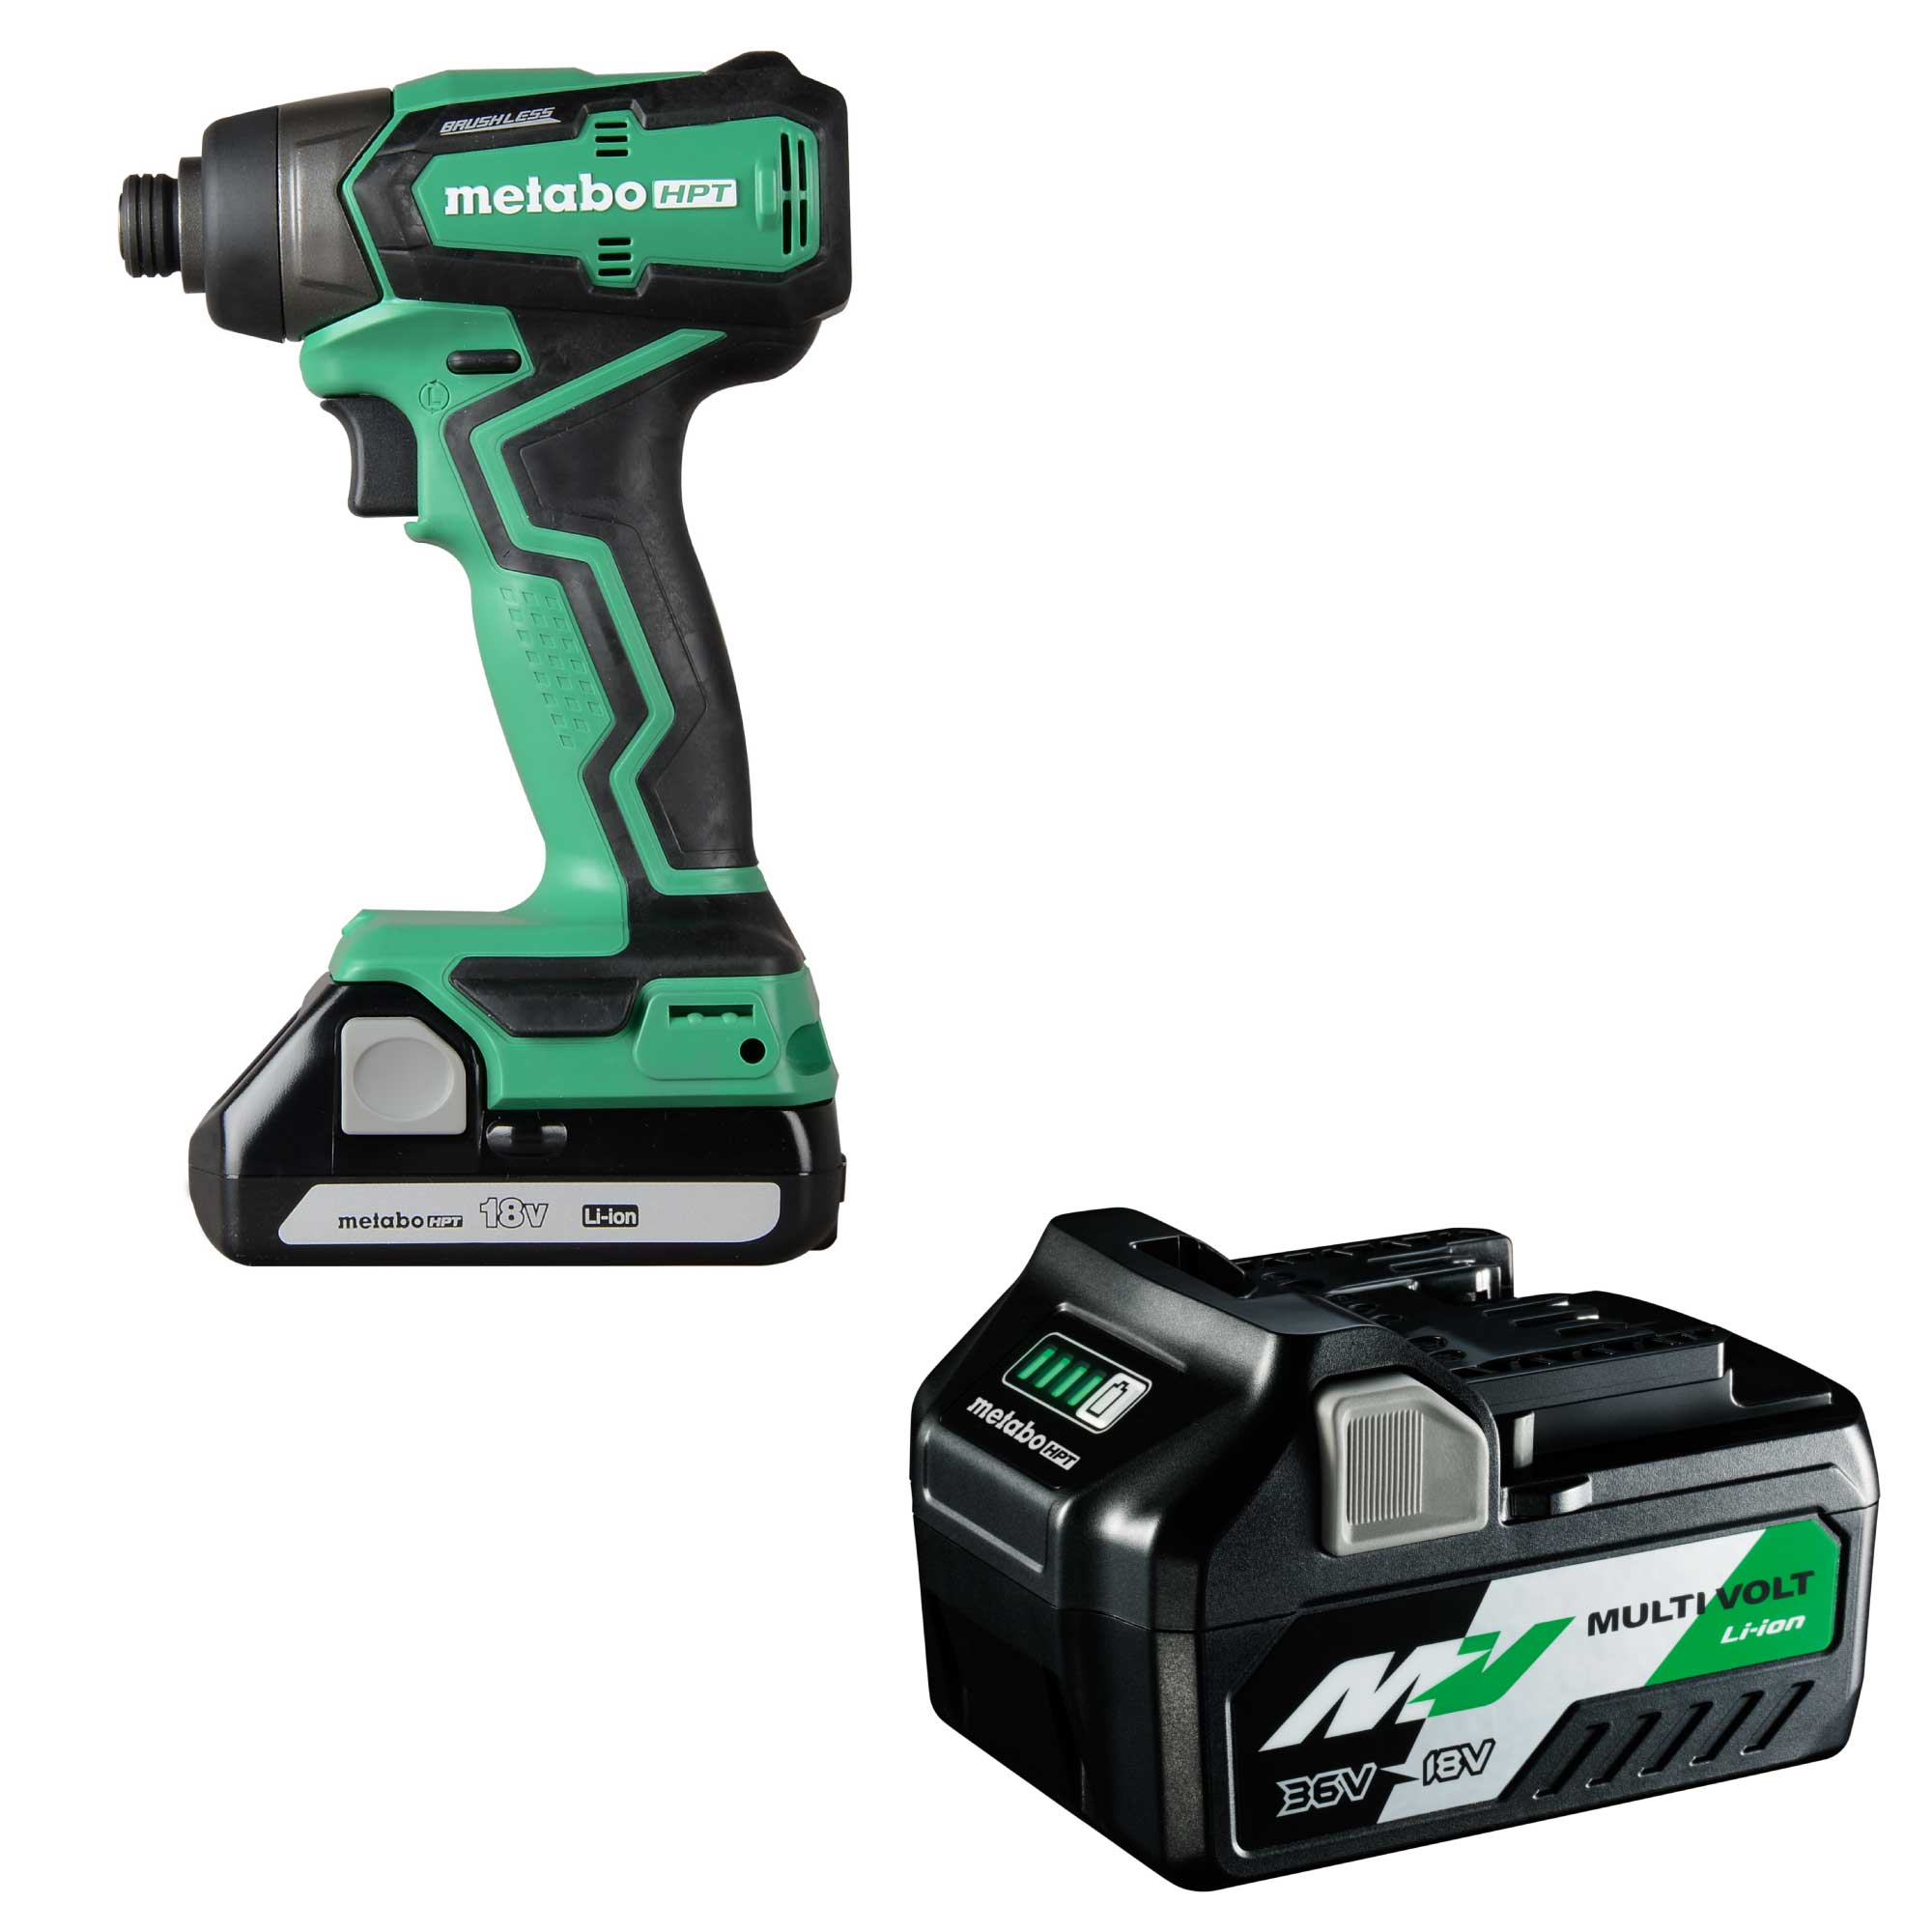 Metabo HPT MultiVolt 18-volt 1/4-in Variable Speed Brushless Cordless Impact Driver (2-batteries included) with MultiVolt 2.5Ah/5.0Ah Power Tool